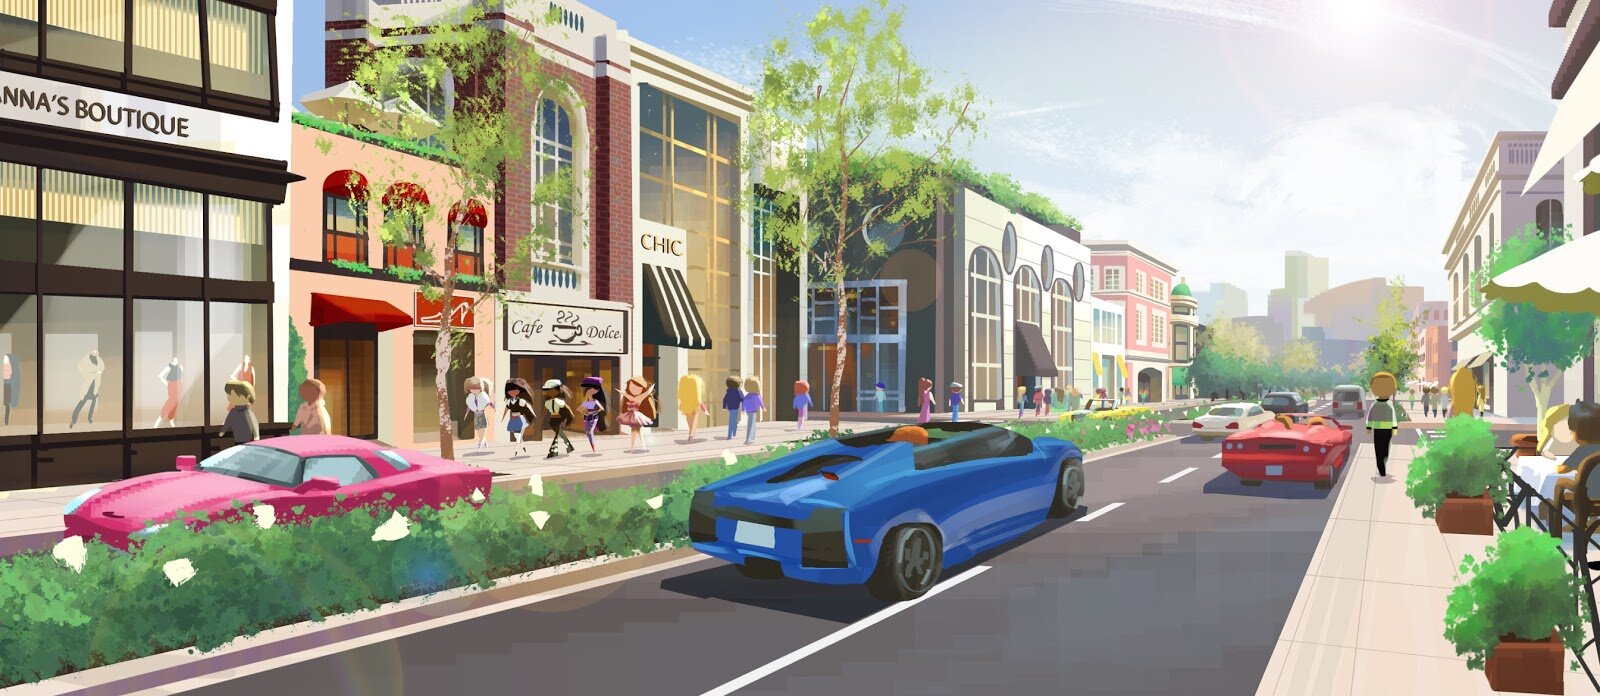 Chic Street, a shopping hotspot inspired by Rodeo Drive in Beverly Hills.